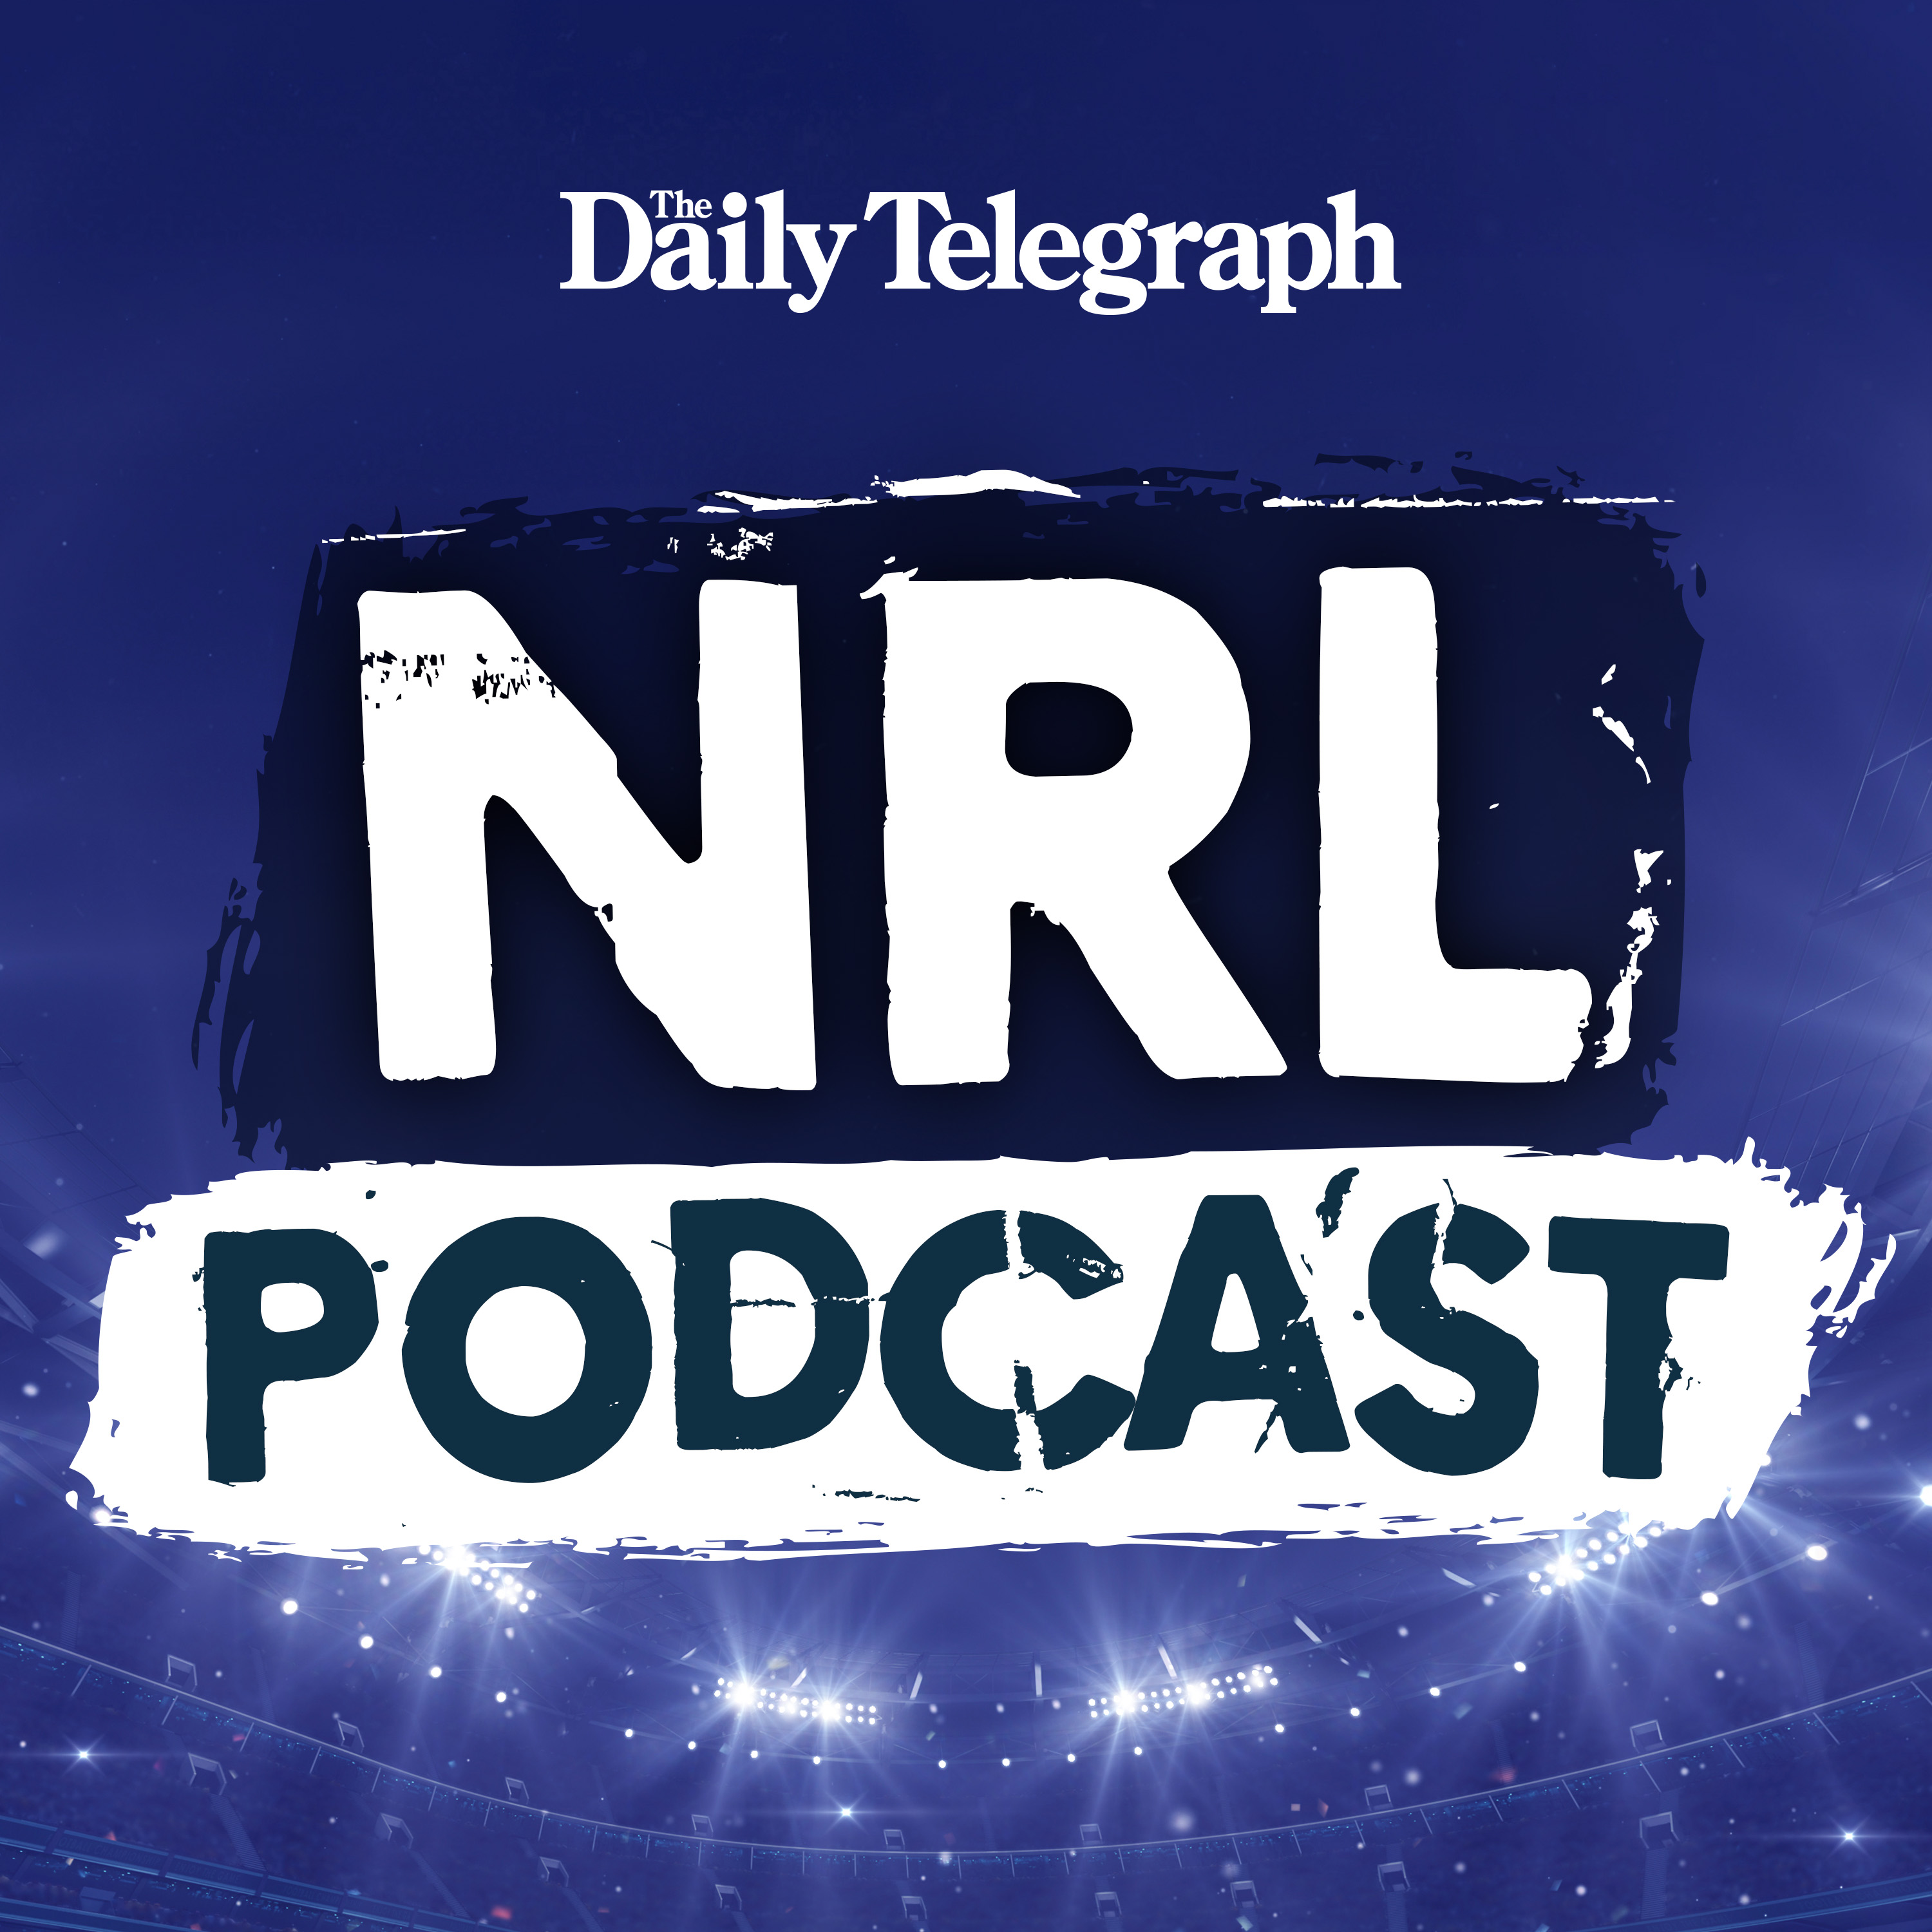 Mick's feud with an Origin star